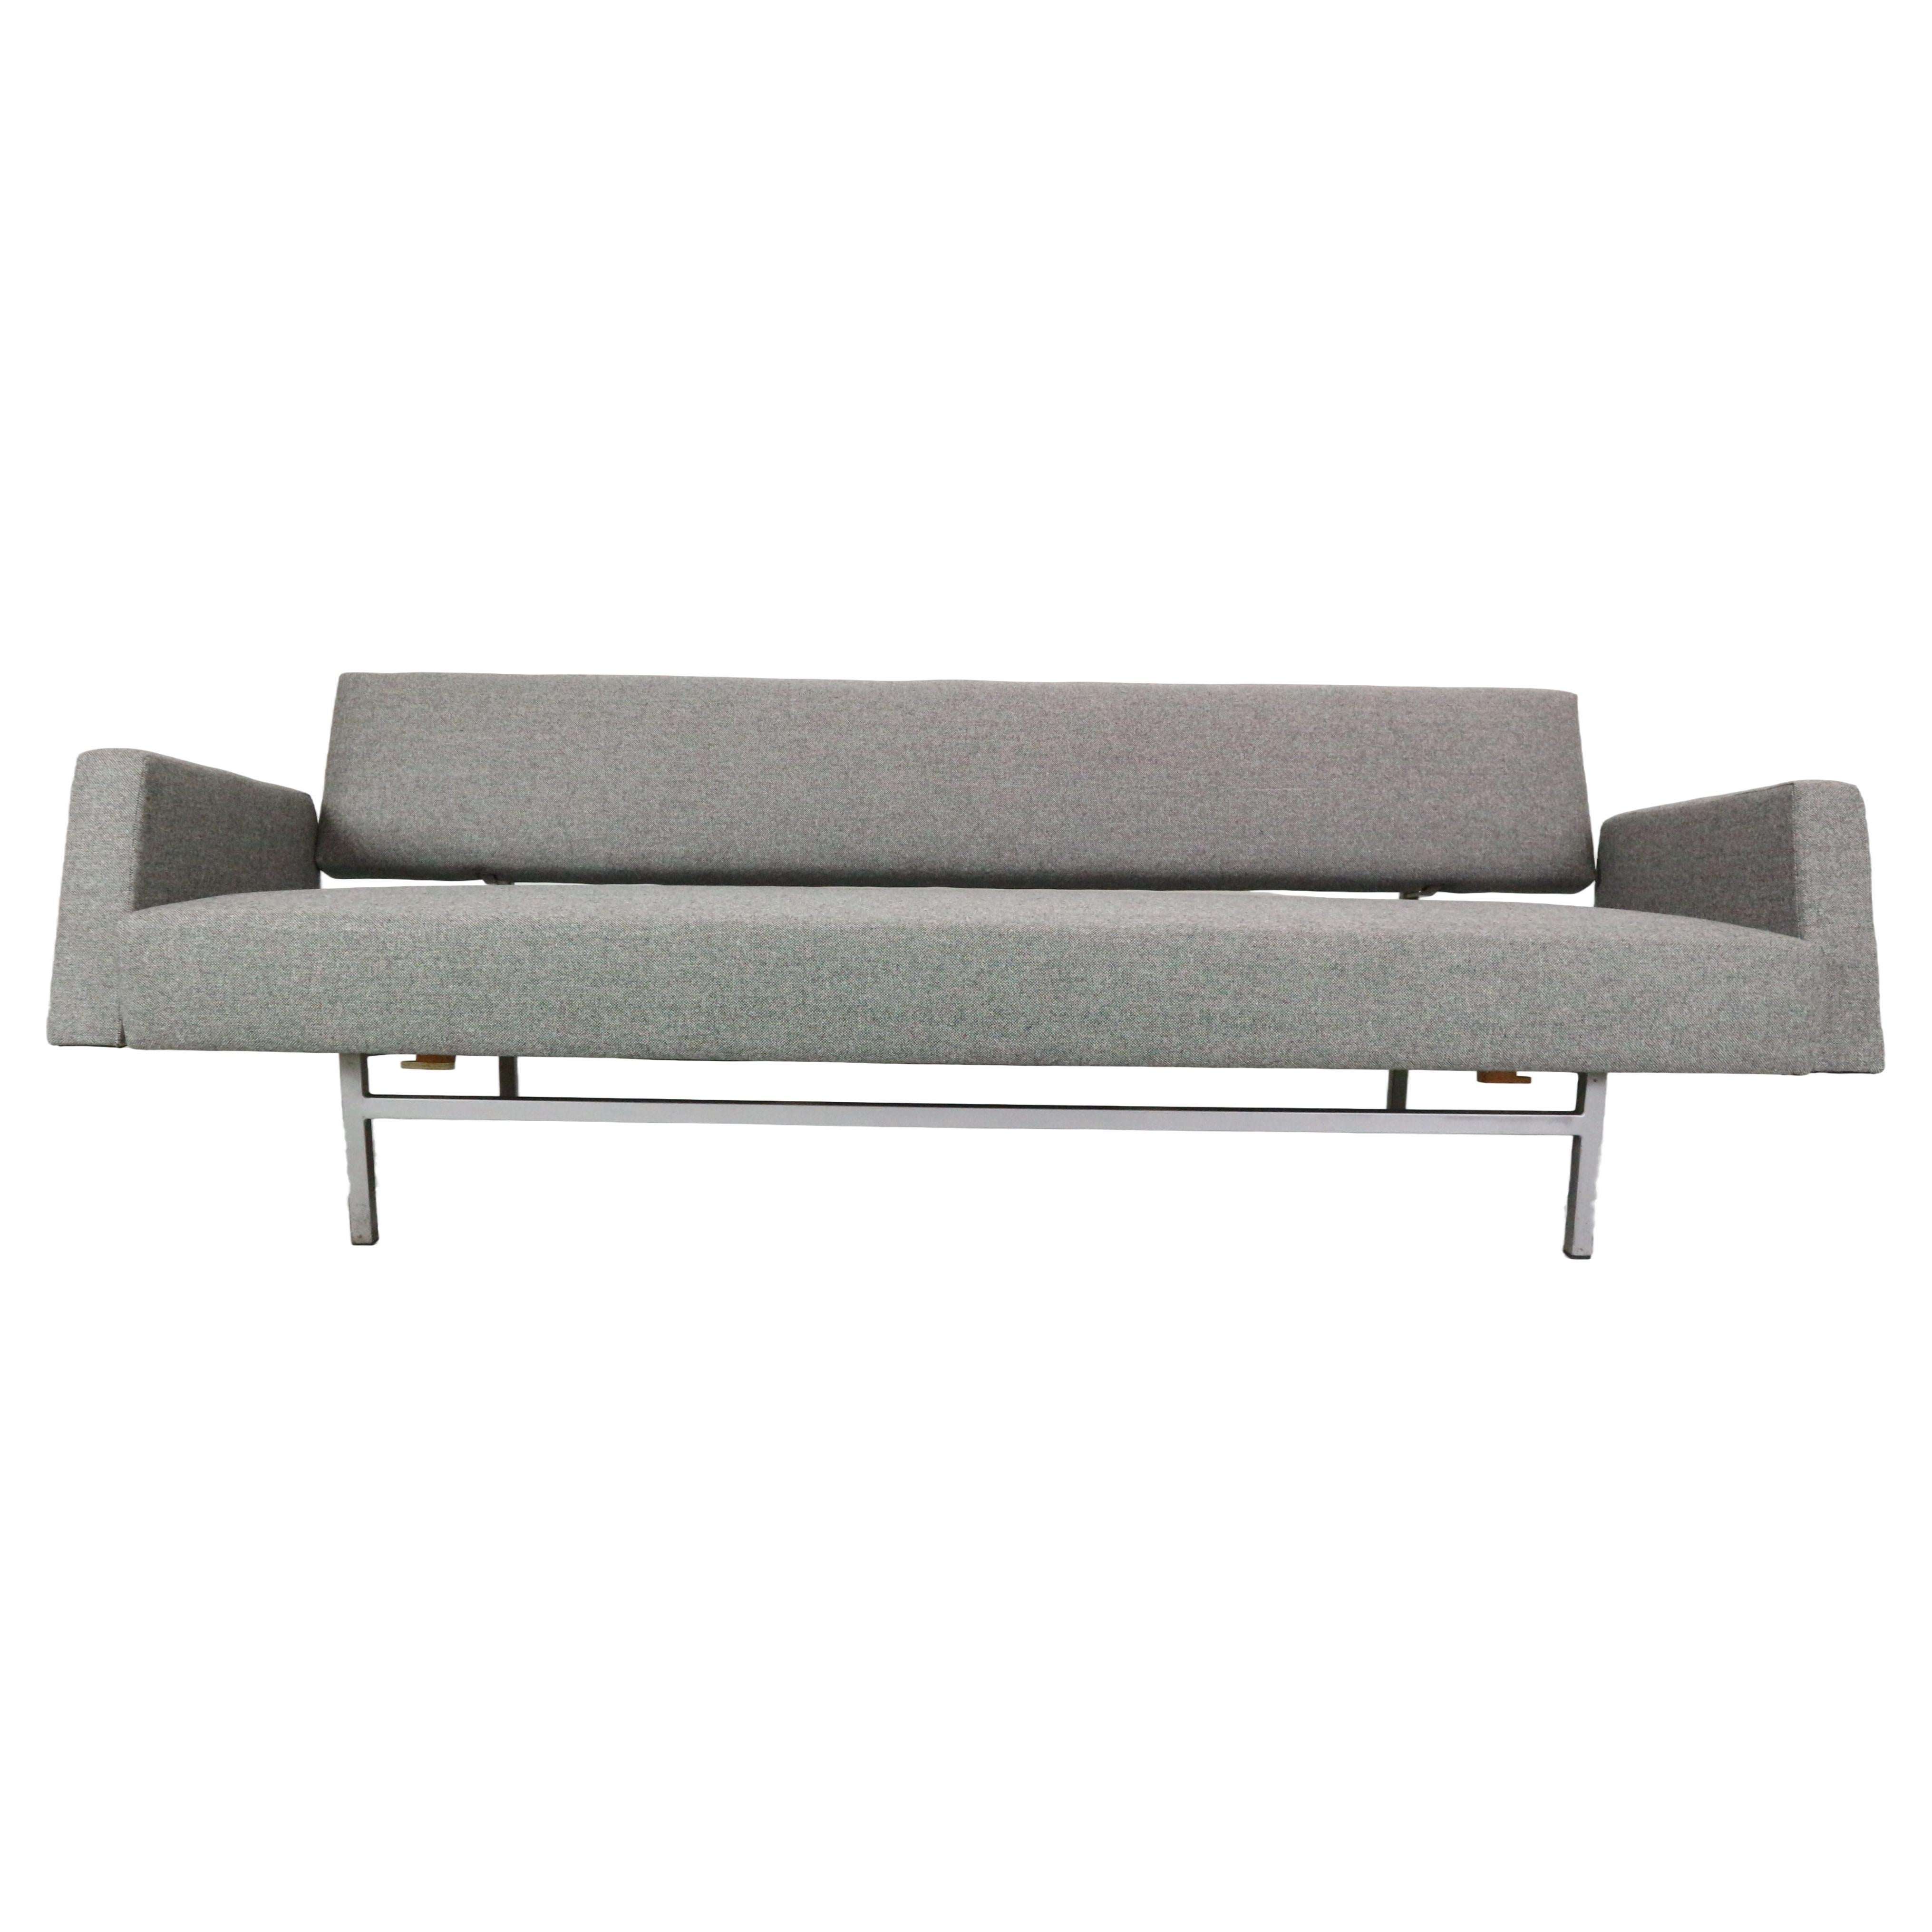 Rob Parry Newly Reupholstery Sofa/ Daybed for Gelderland, 1960 Dutch For Sale